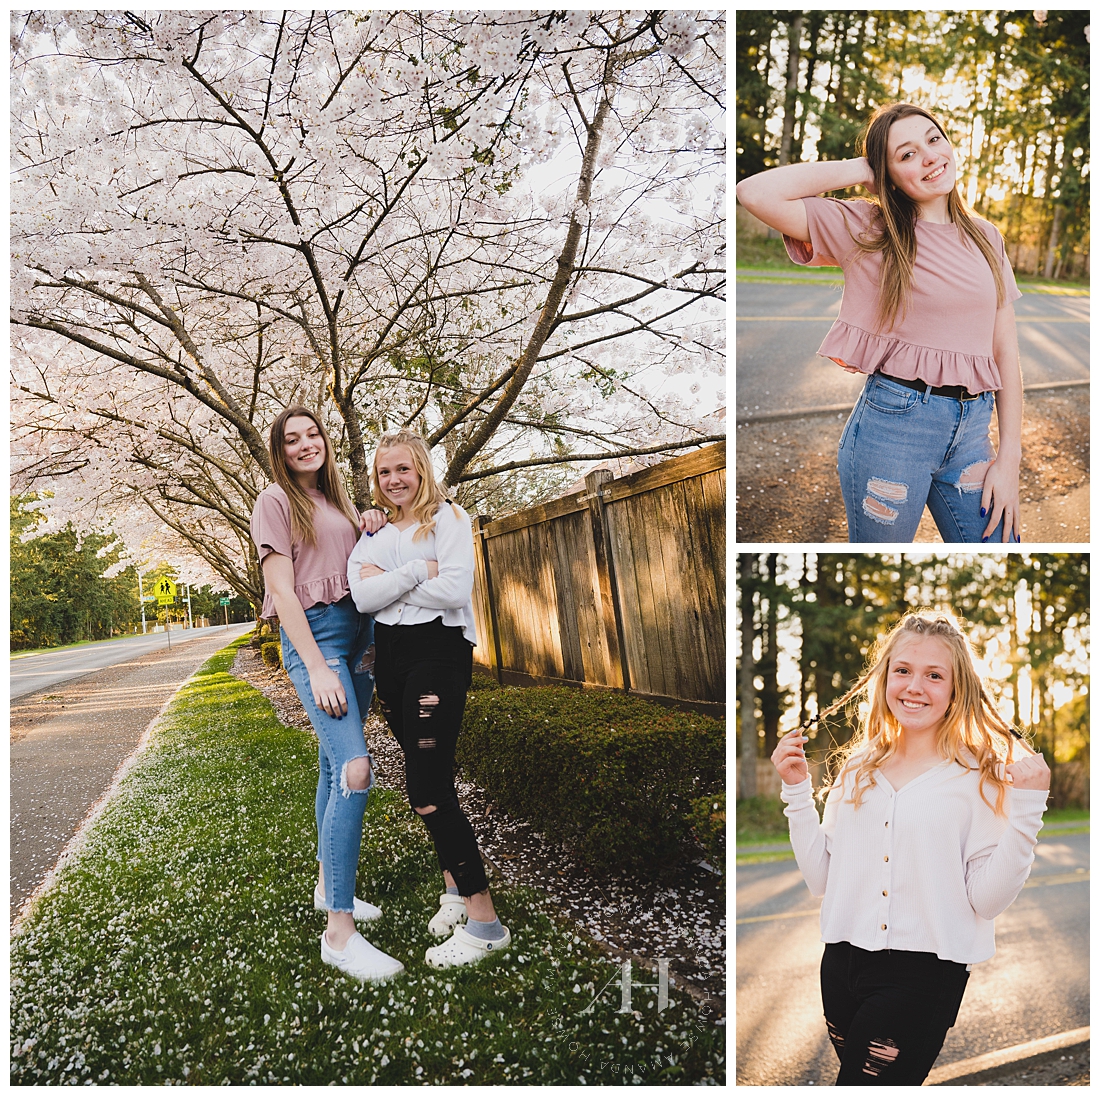 Fun Spring Portraits on a Tree-Lined Street | Outfit Ideas for Spring Portraits, How to Style a Themed Shoot for Models, High School Senior Portraits, Outfit Ideas | Photographed by Tacoma Senior Photographer Amanda Howse